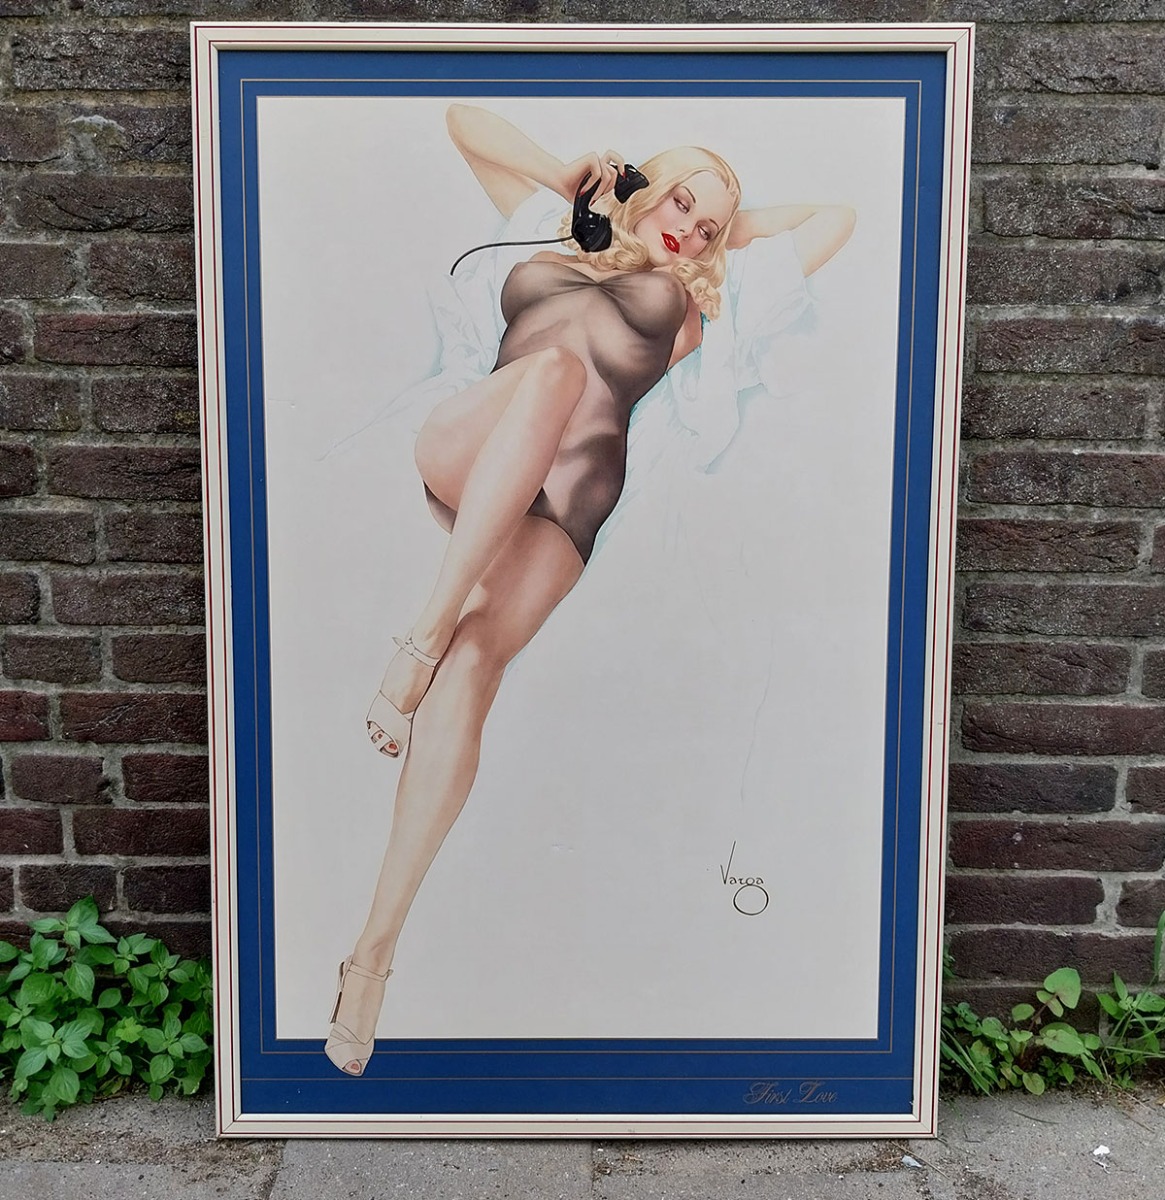 Fiftiesstore Alberto Vargas First Love Pin Up Girl Burlesque Poster Print in Vintage Frame